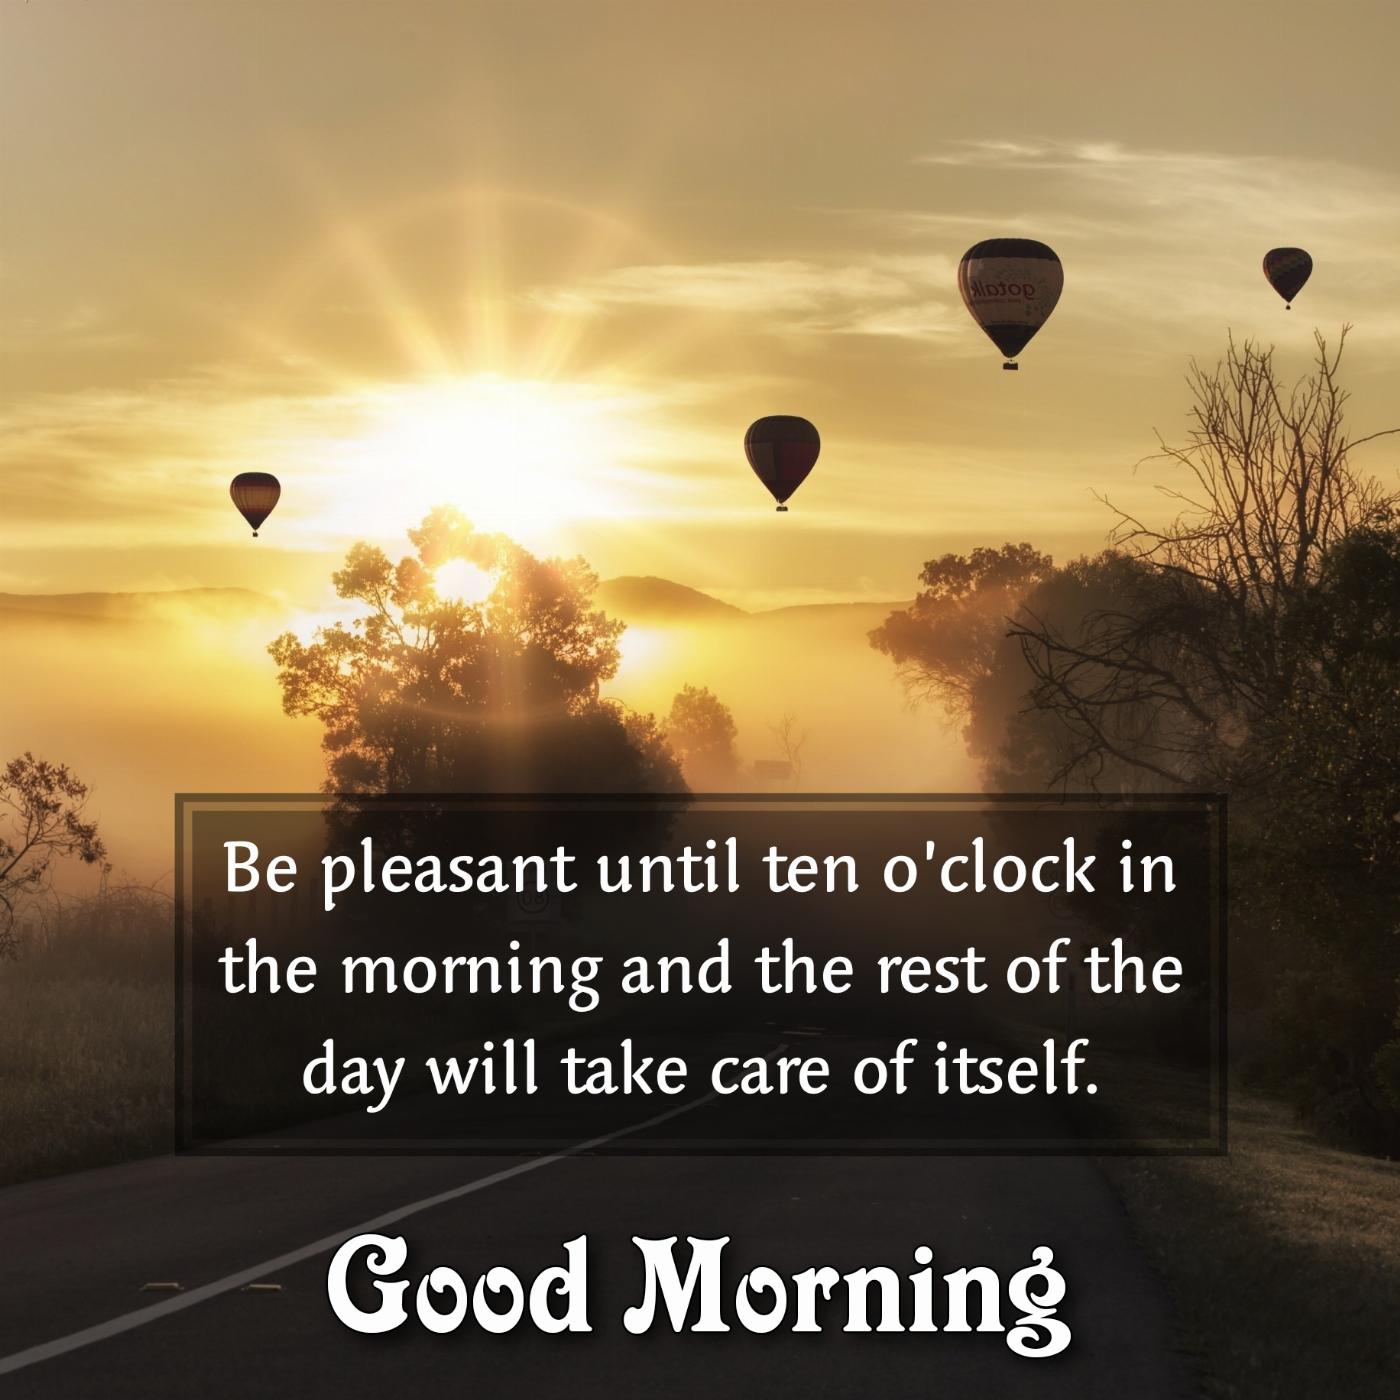 Be pleasant until ten oclock in the morning